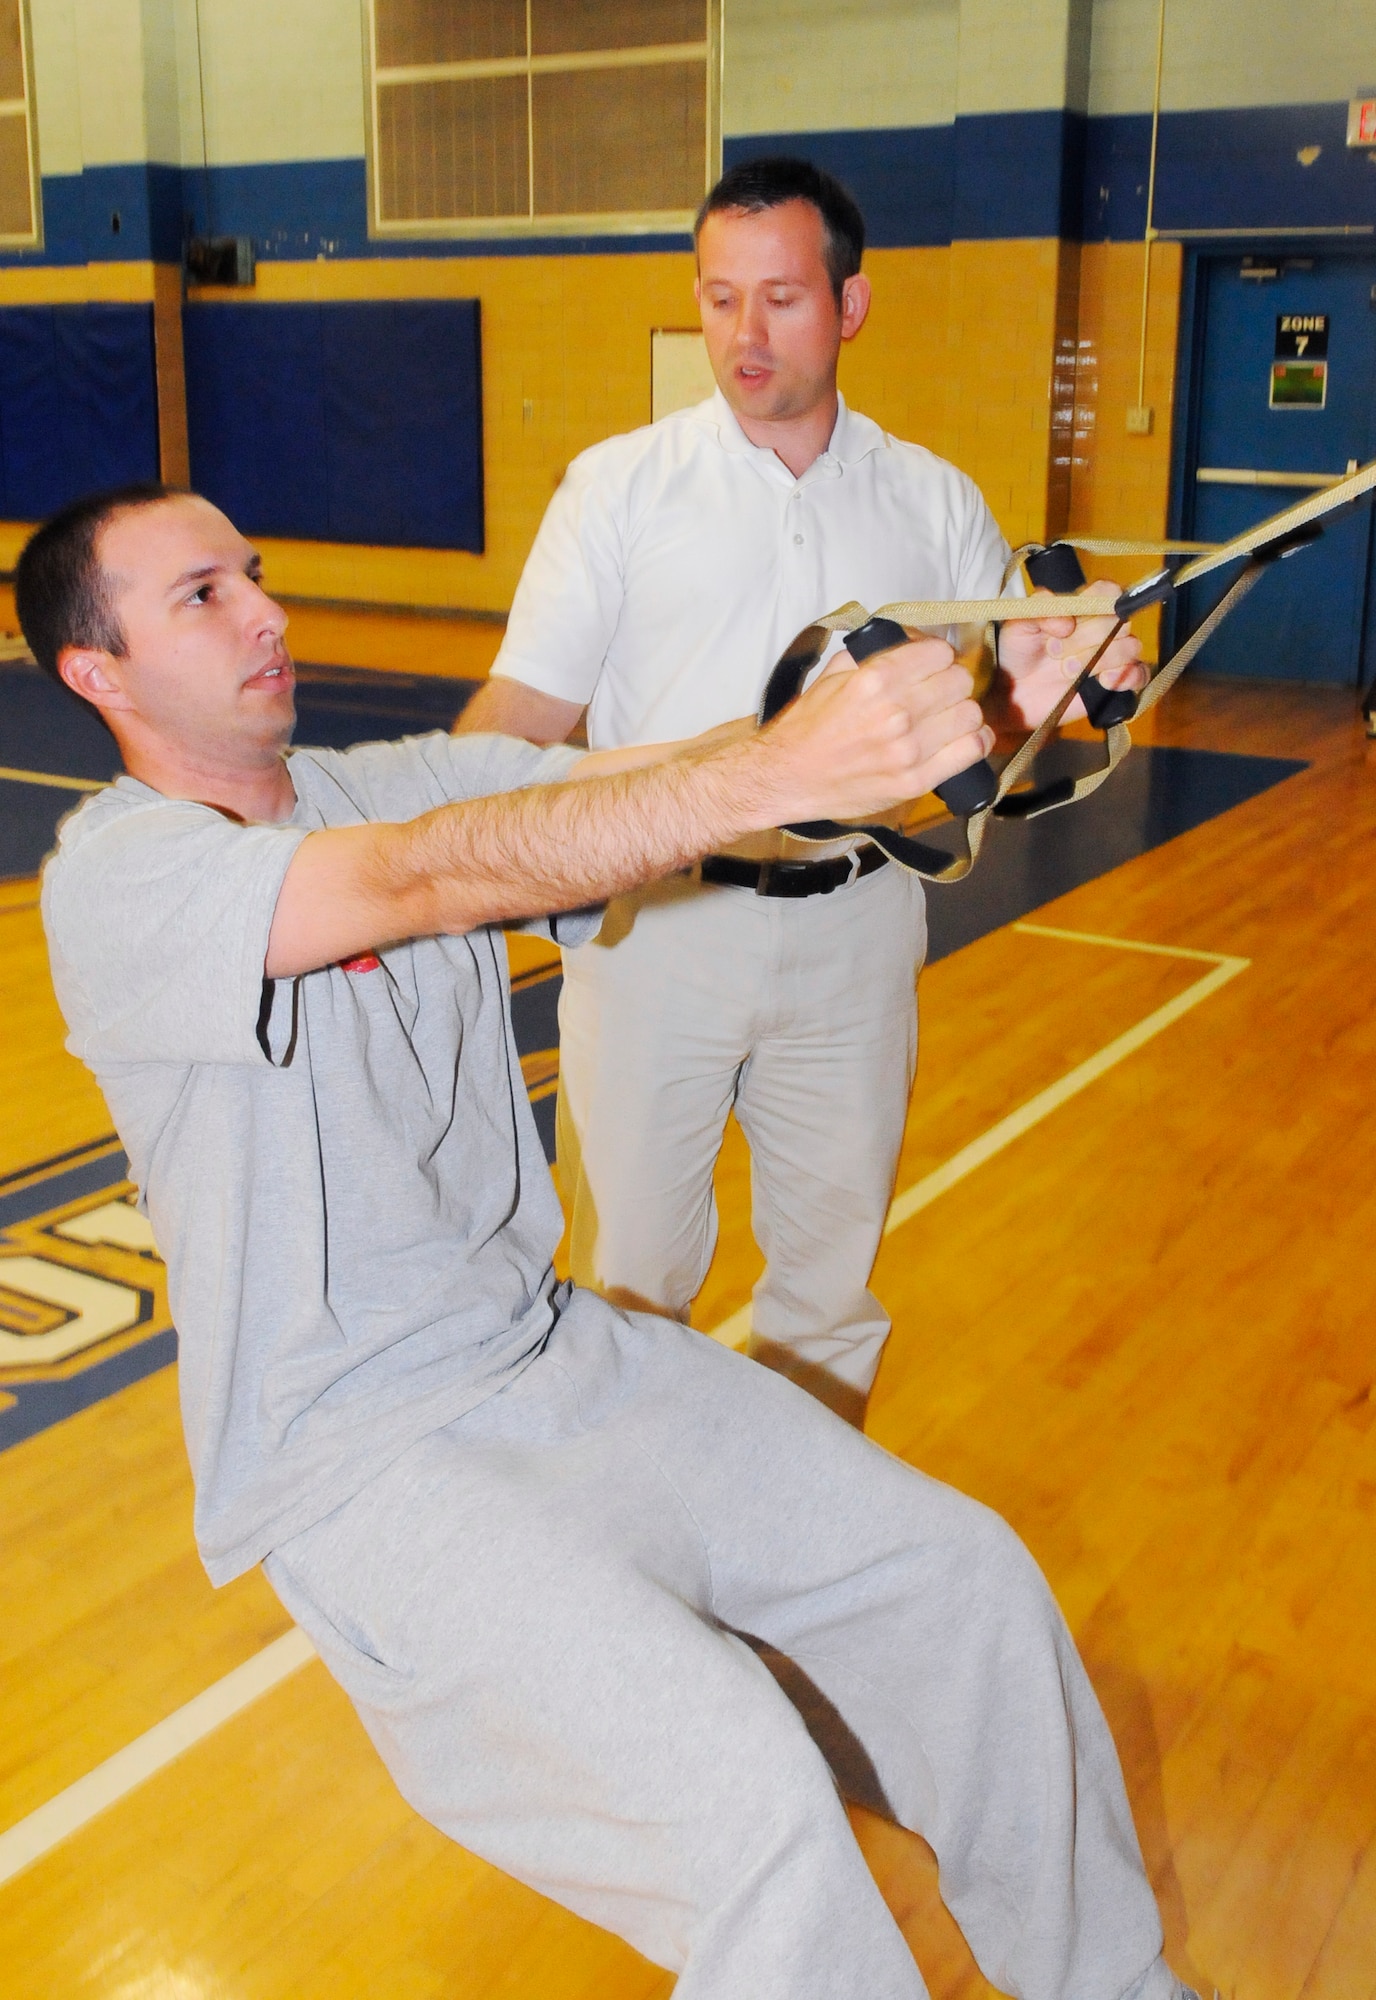 Greg Reynolds, at right,  HAWC exercise physiologist, assists Staff Sgt. Trent Schultz during Total Force Fitness Program corrective exercise time. (U. S. Air Force photo by Sue Sapp)